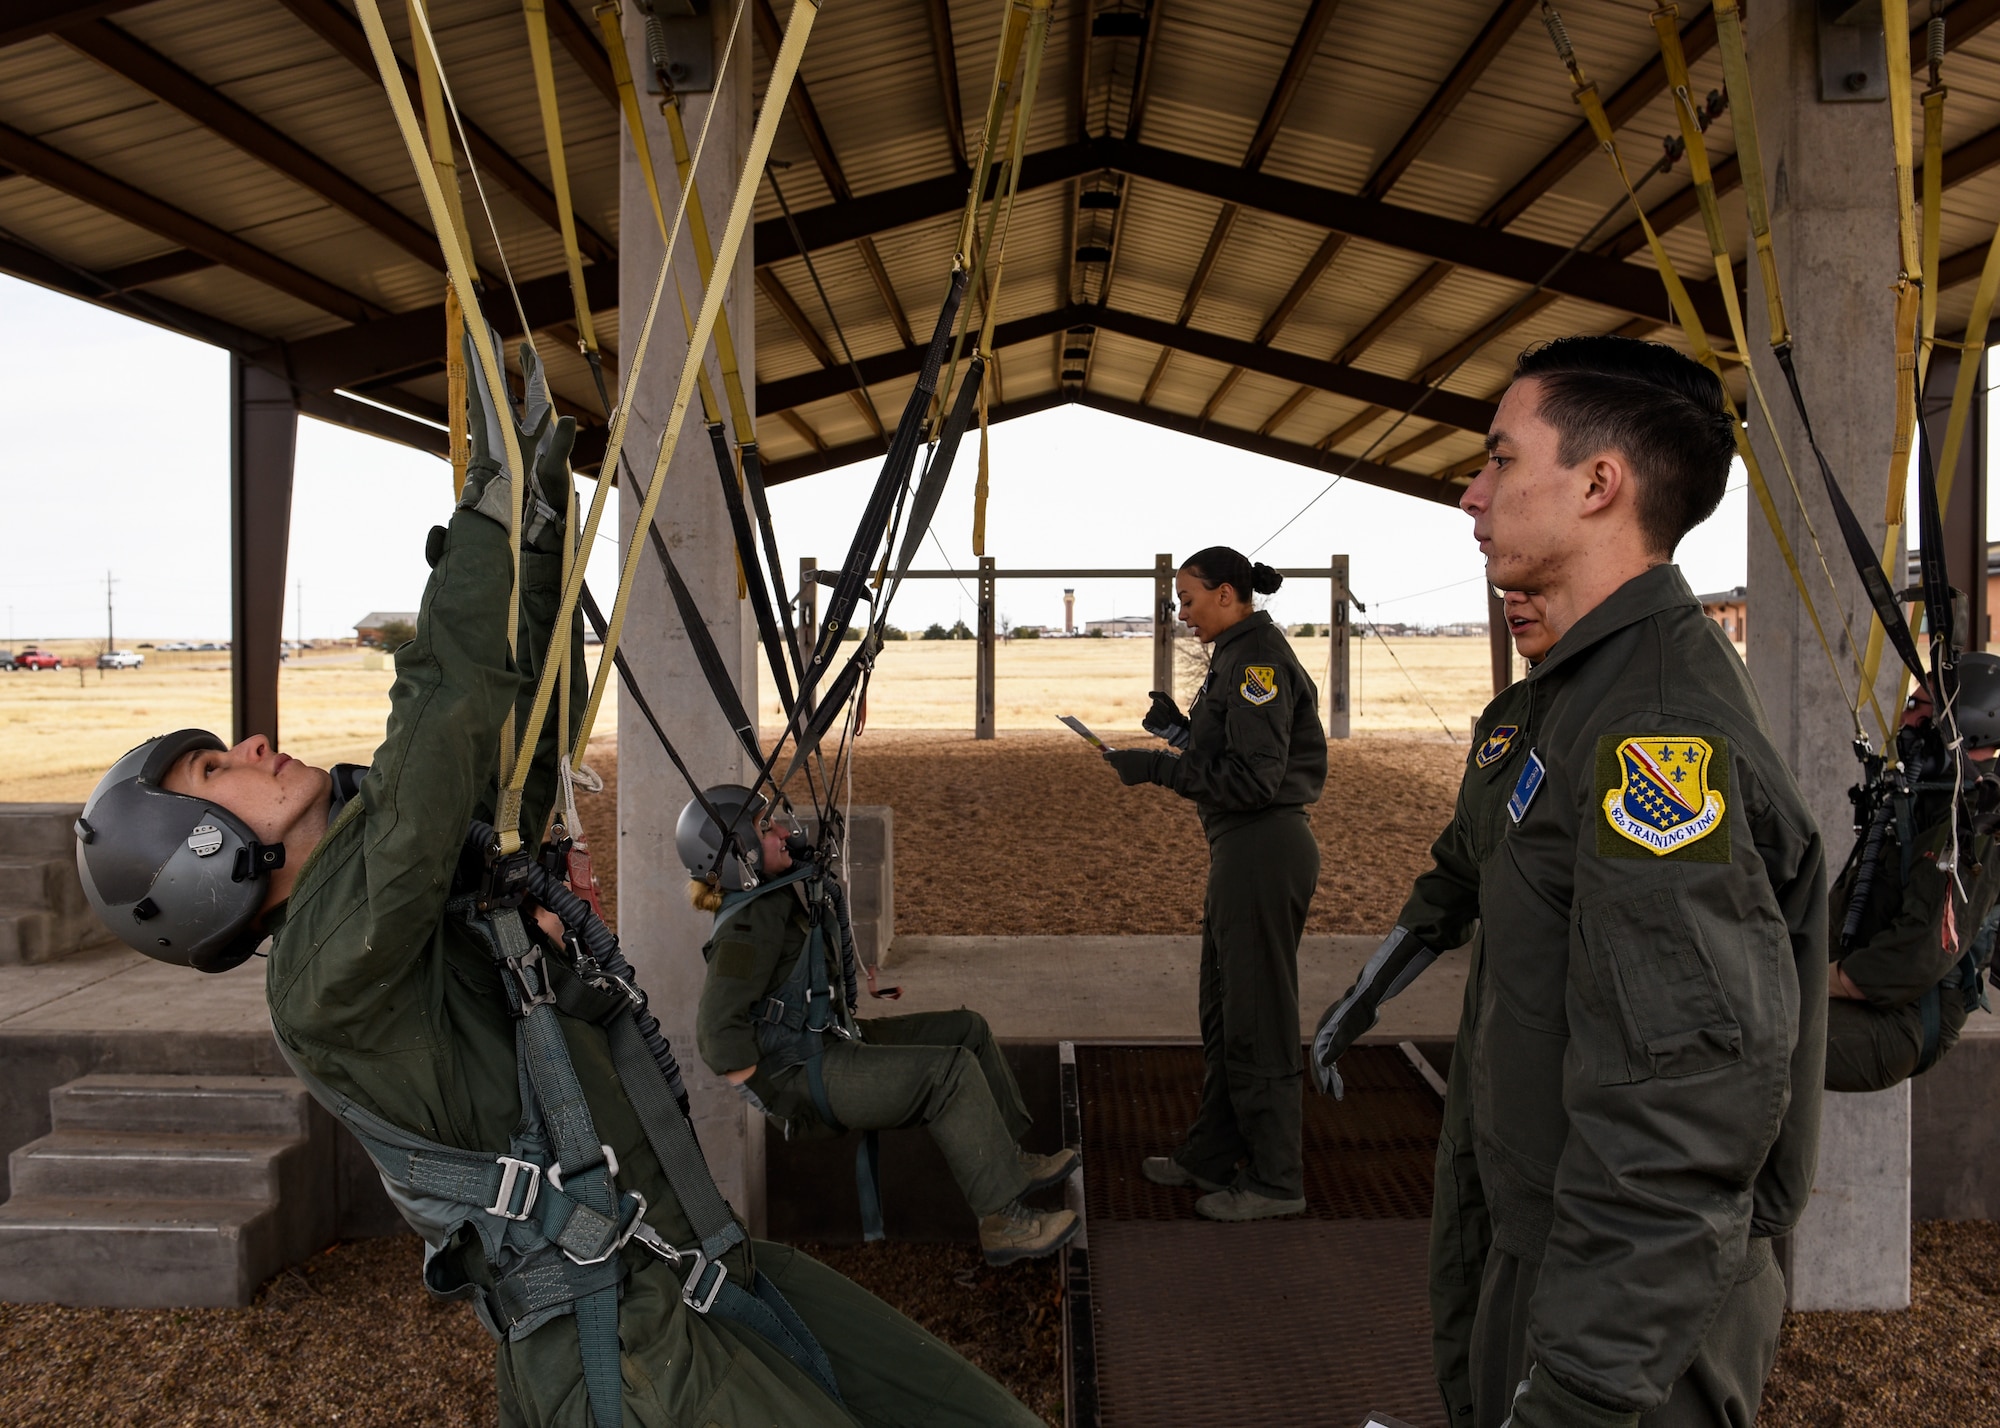 Pilot Training Next program students, left, simulate being in a parachute while 82nd Aerospace Medical Squadron physiology technicians supervise them at Sheppard Air Force Base, Texas, Jan. 29, 2019. This is the same training that the Euro-Nato Joint Jet Pilot Training program students with the 80th Flying Training Wing go through during their stay at Sheppard. (U.S. Air Force photo by Airman 1st Class Pedro Tenorio)